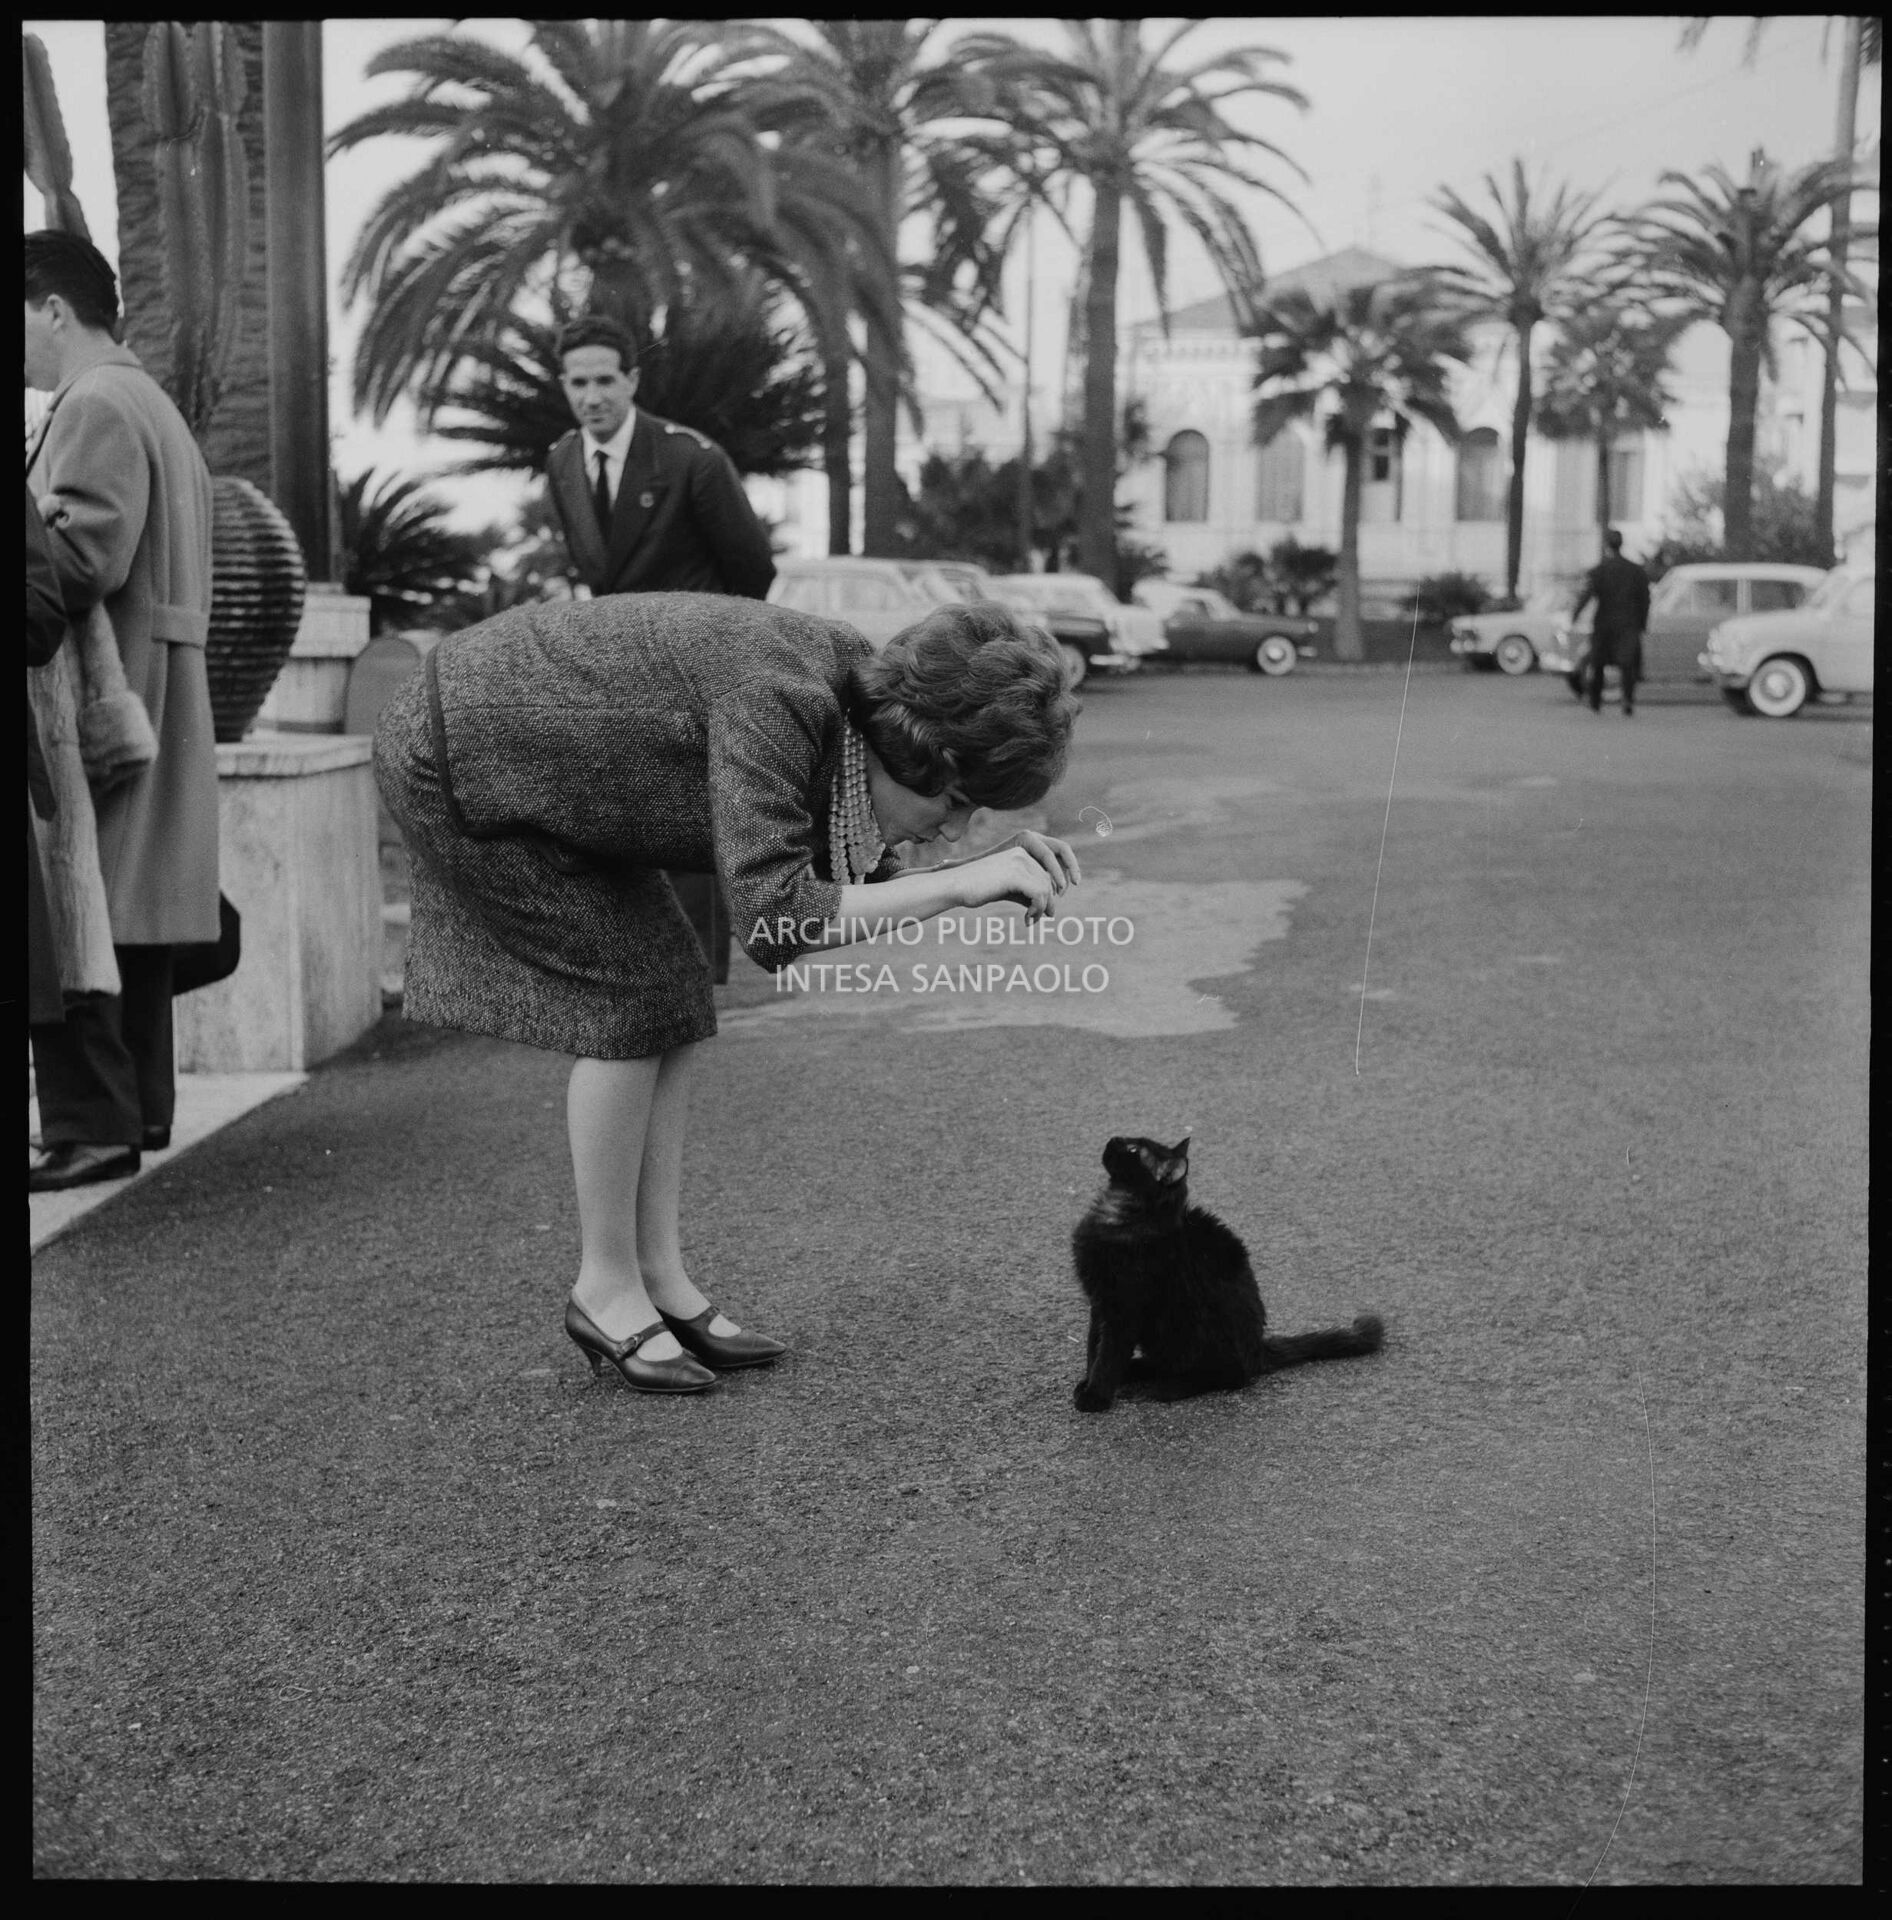 Jolanda Rossin plays with a cat in Sanremo during the 11th Festival